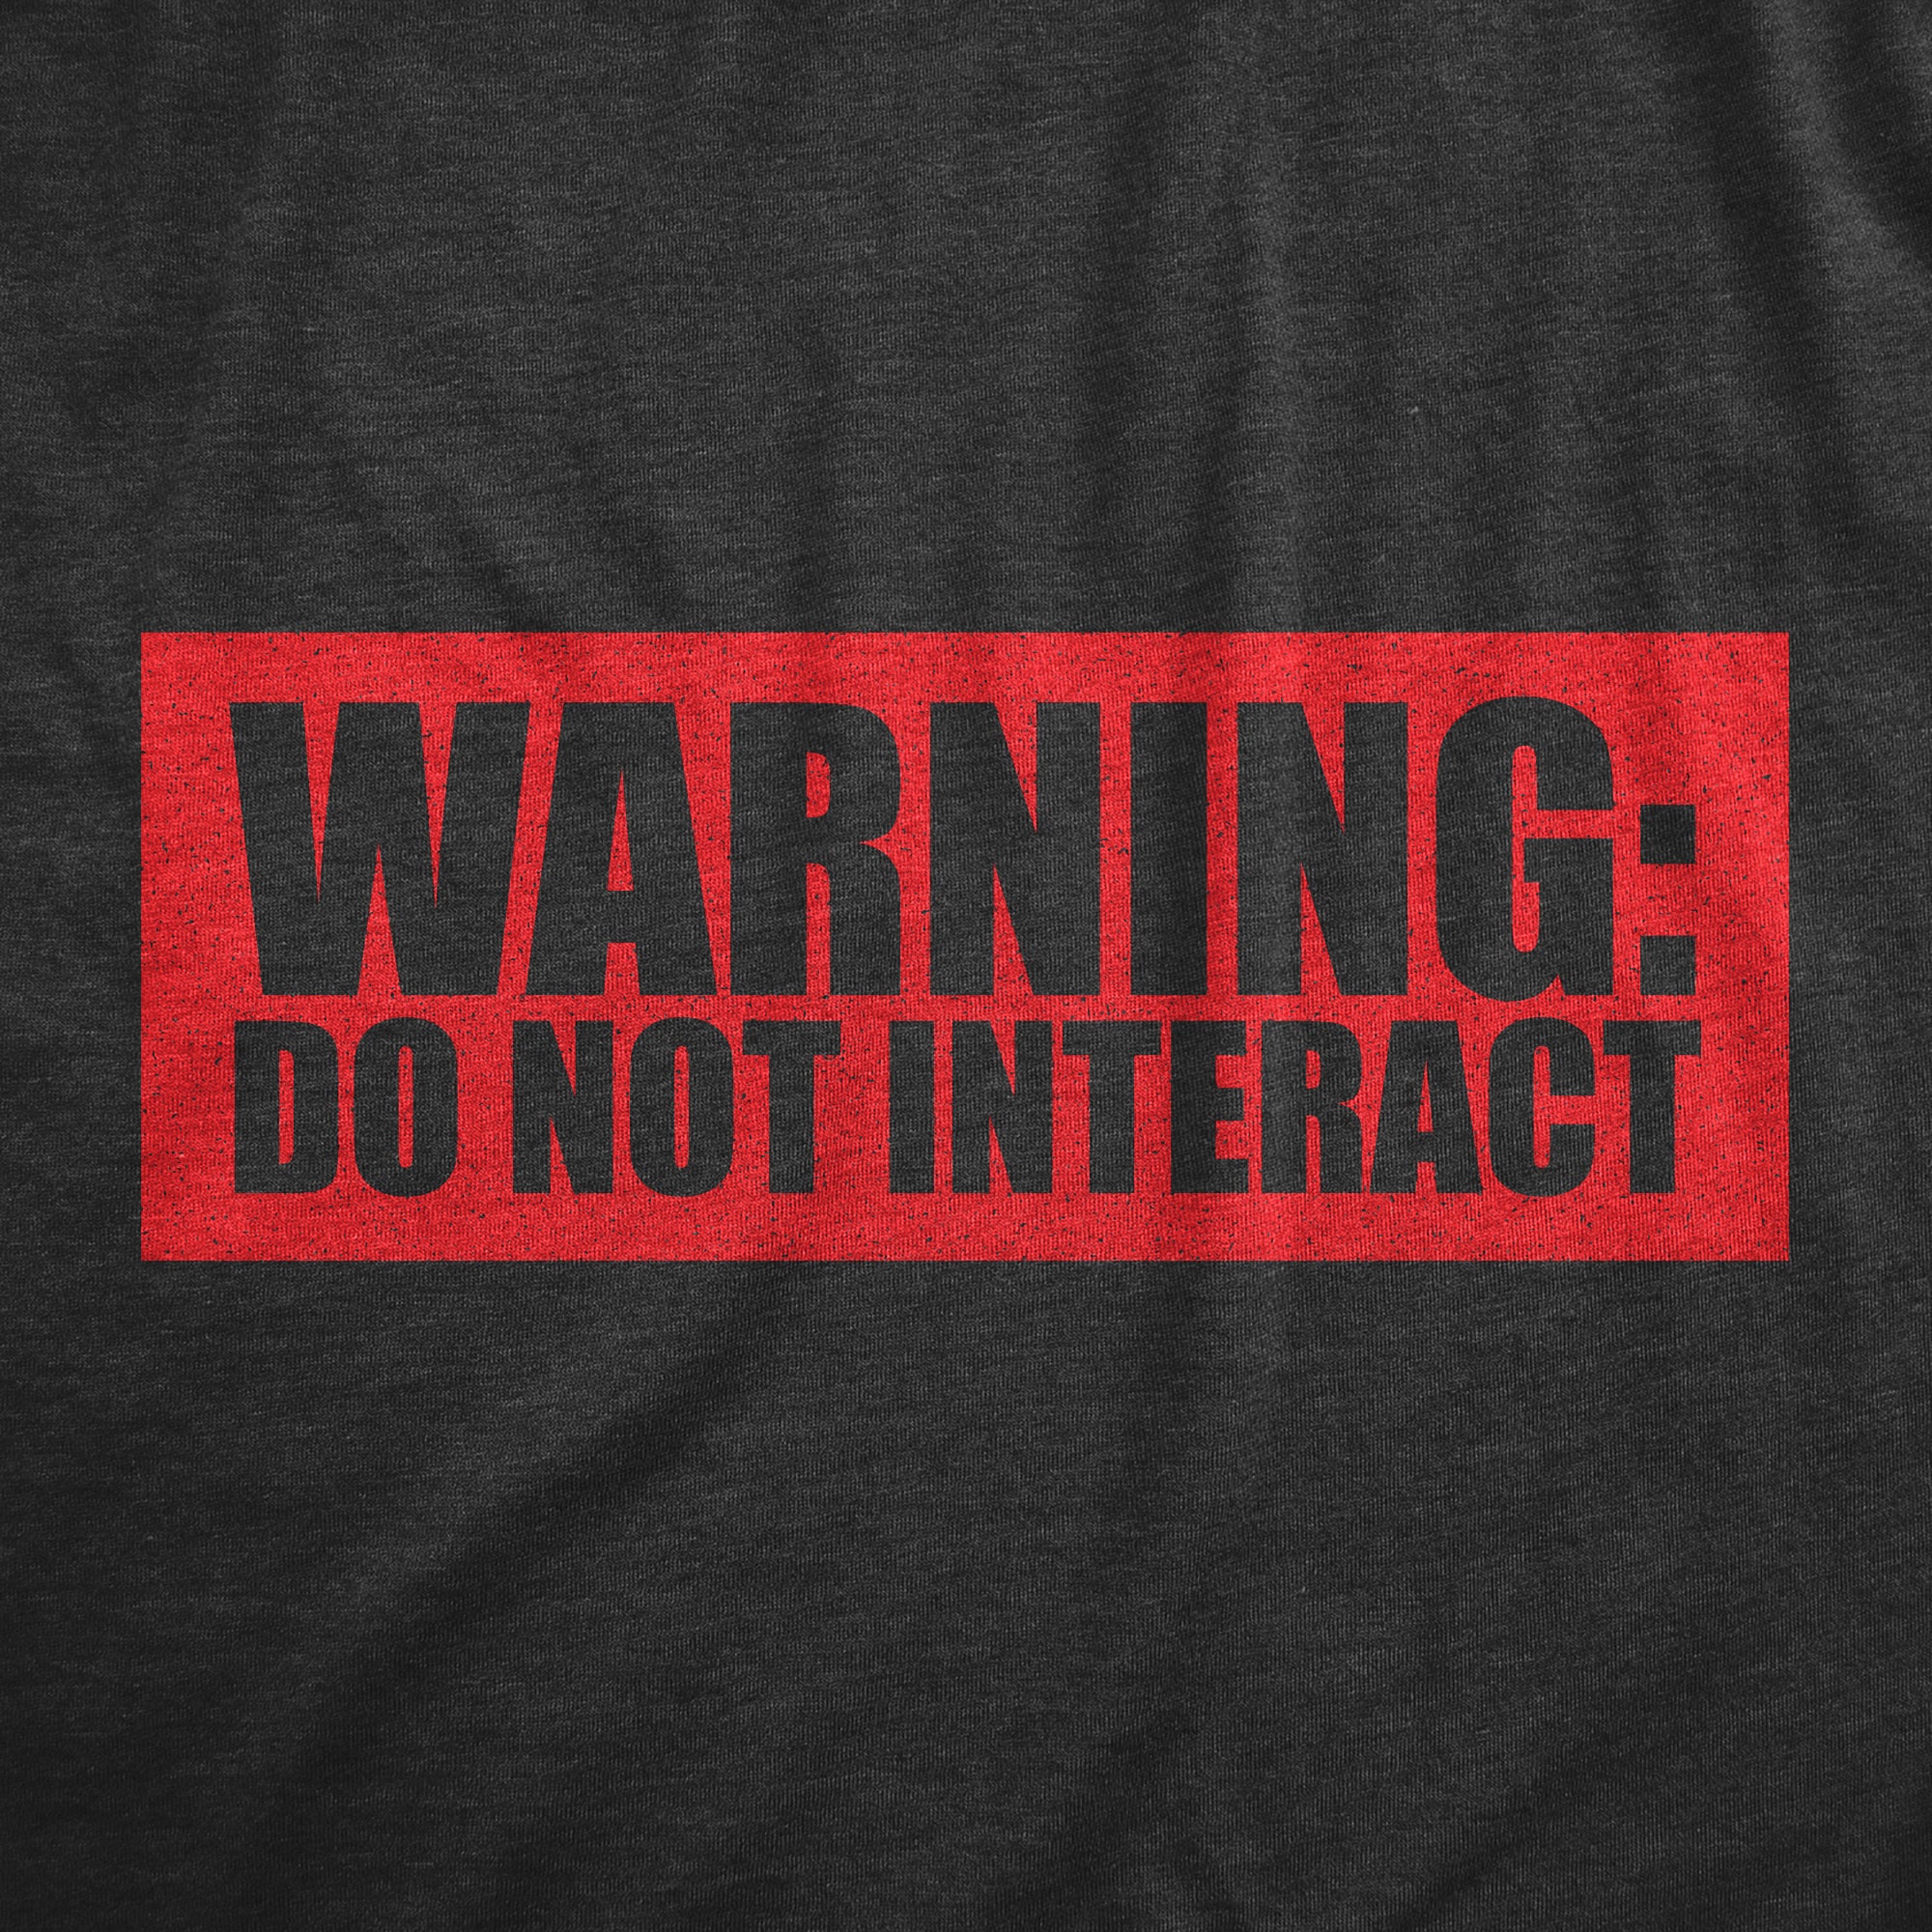 Funny Heather Black - WARNING Warning Do Not Interact Mens T Shirt Nerdy Introvert Sarcastic Tee